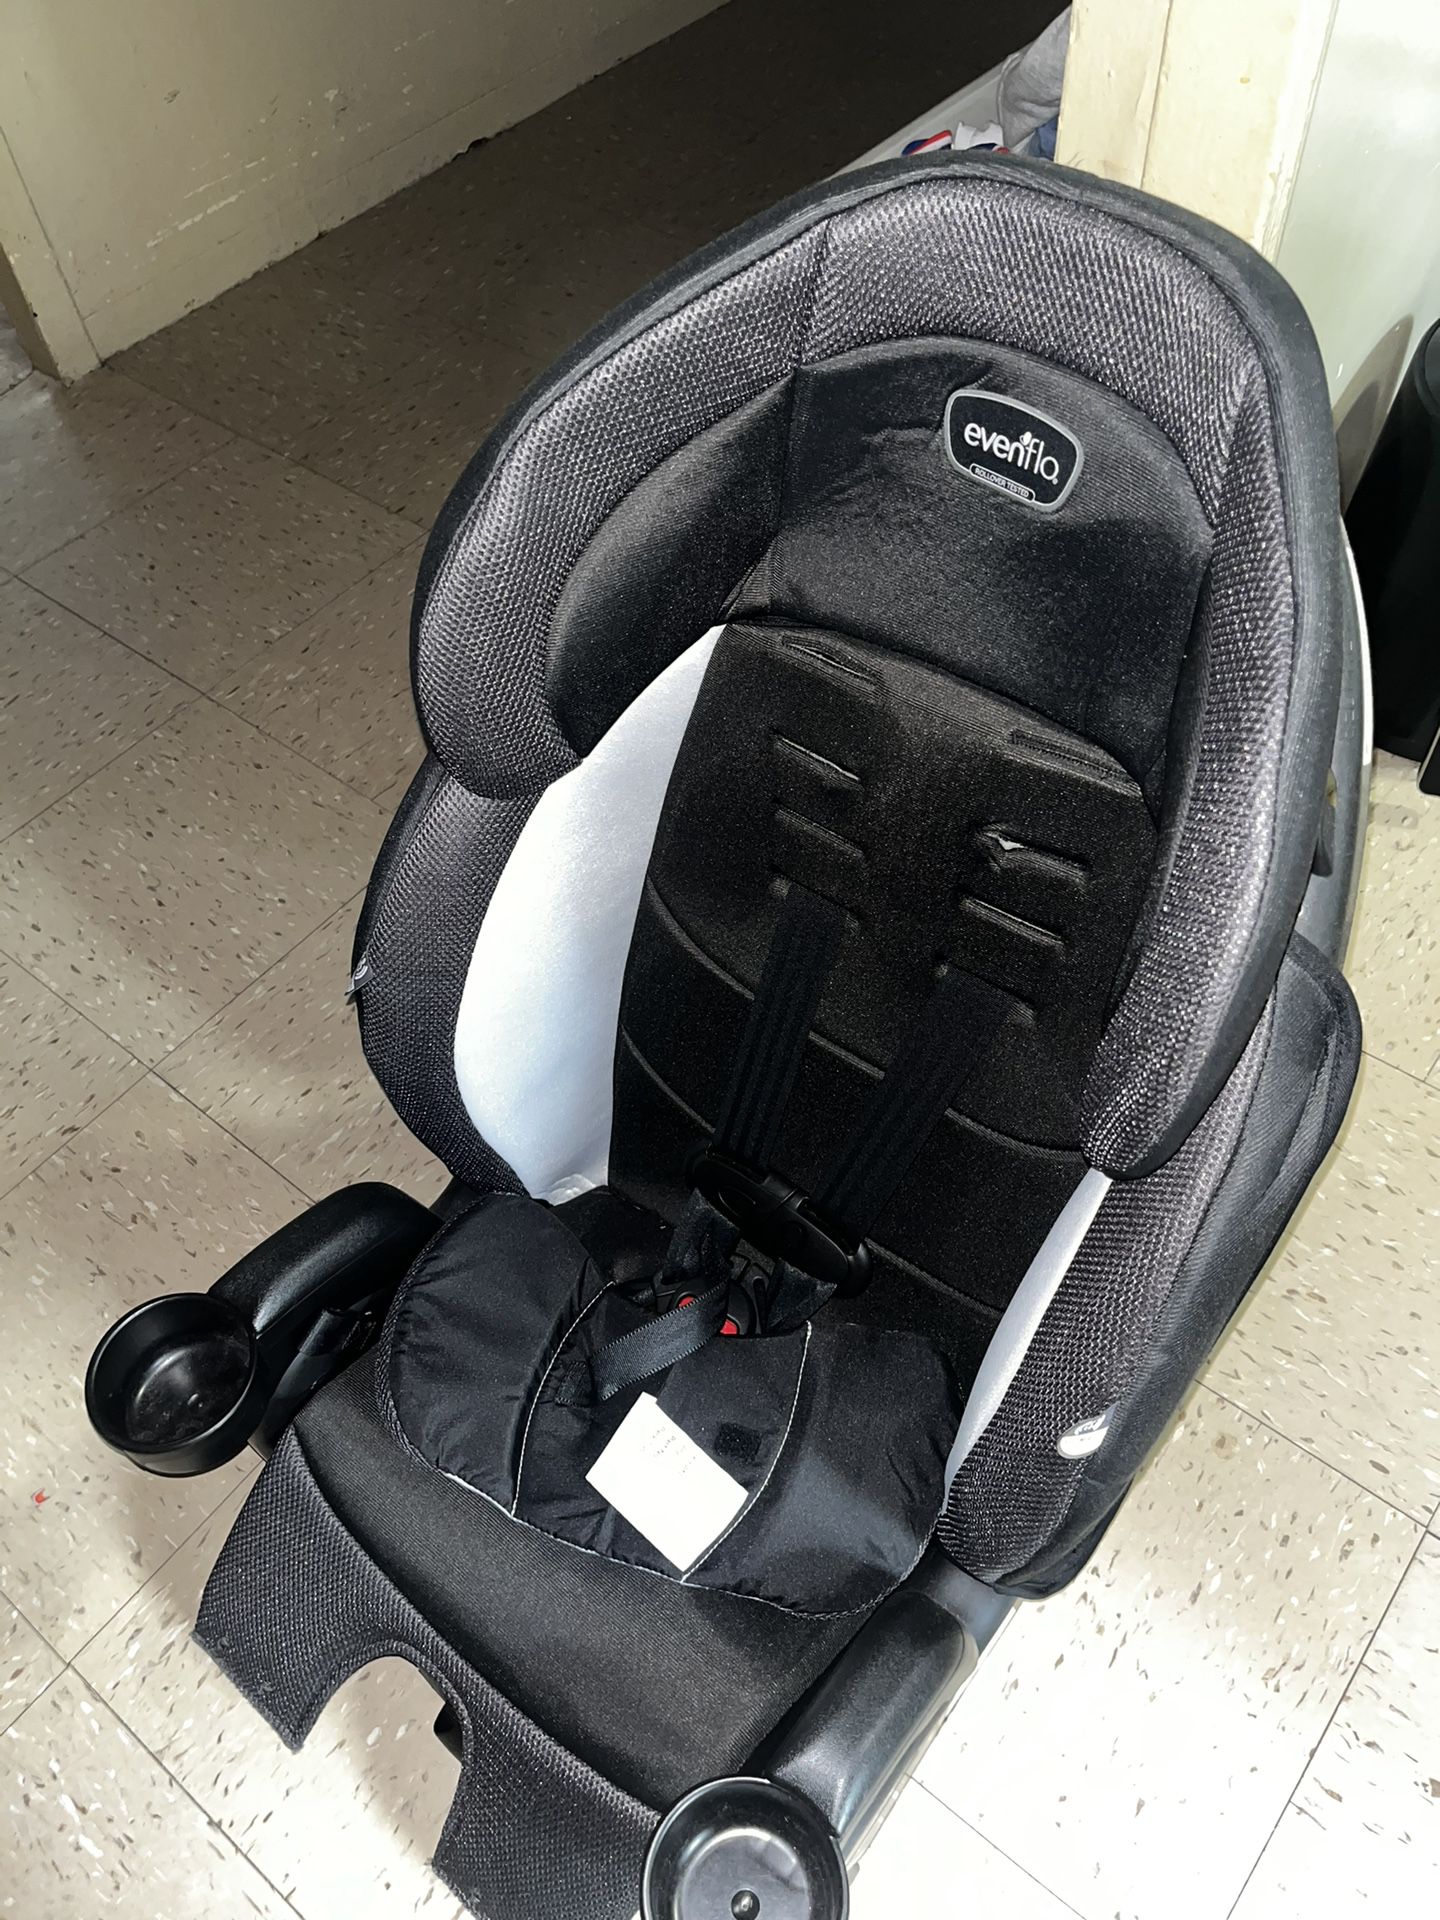 Kids Car Seat Pick Up Only!